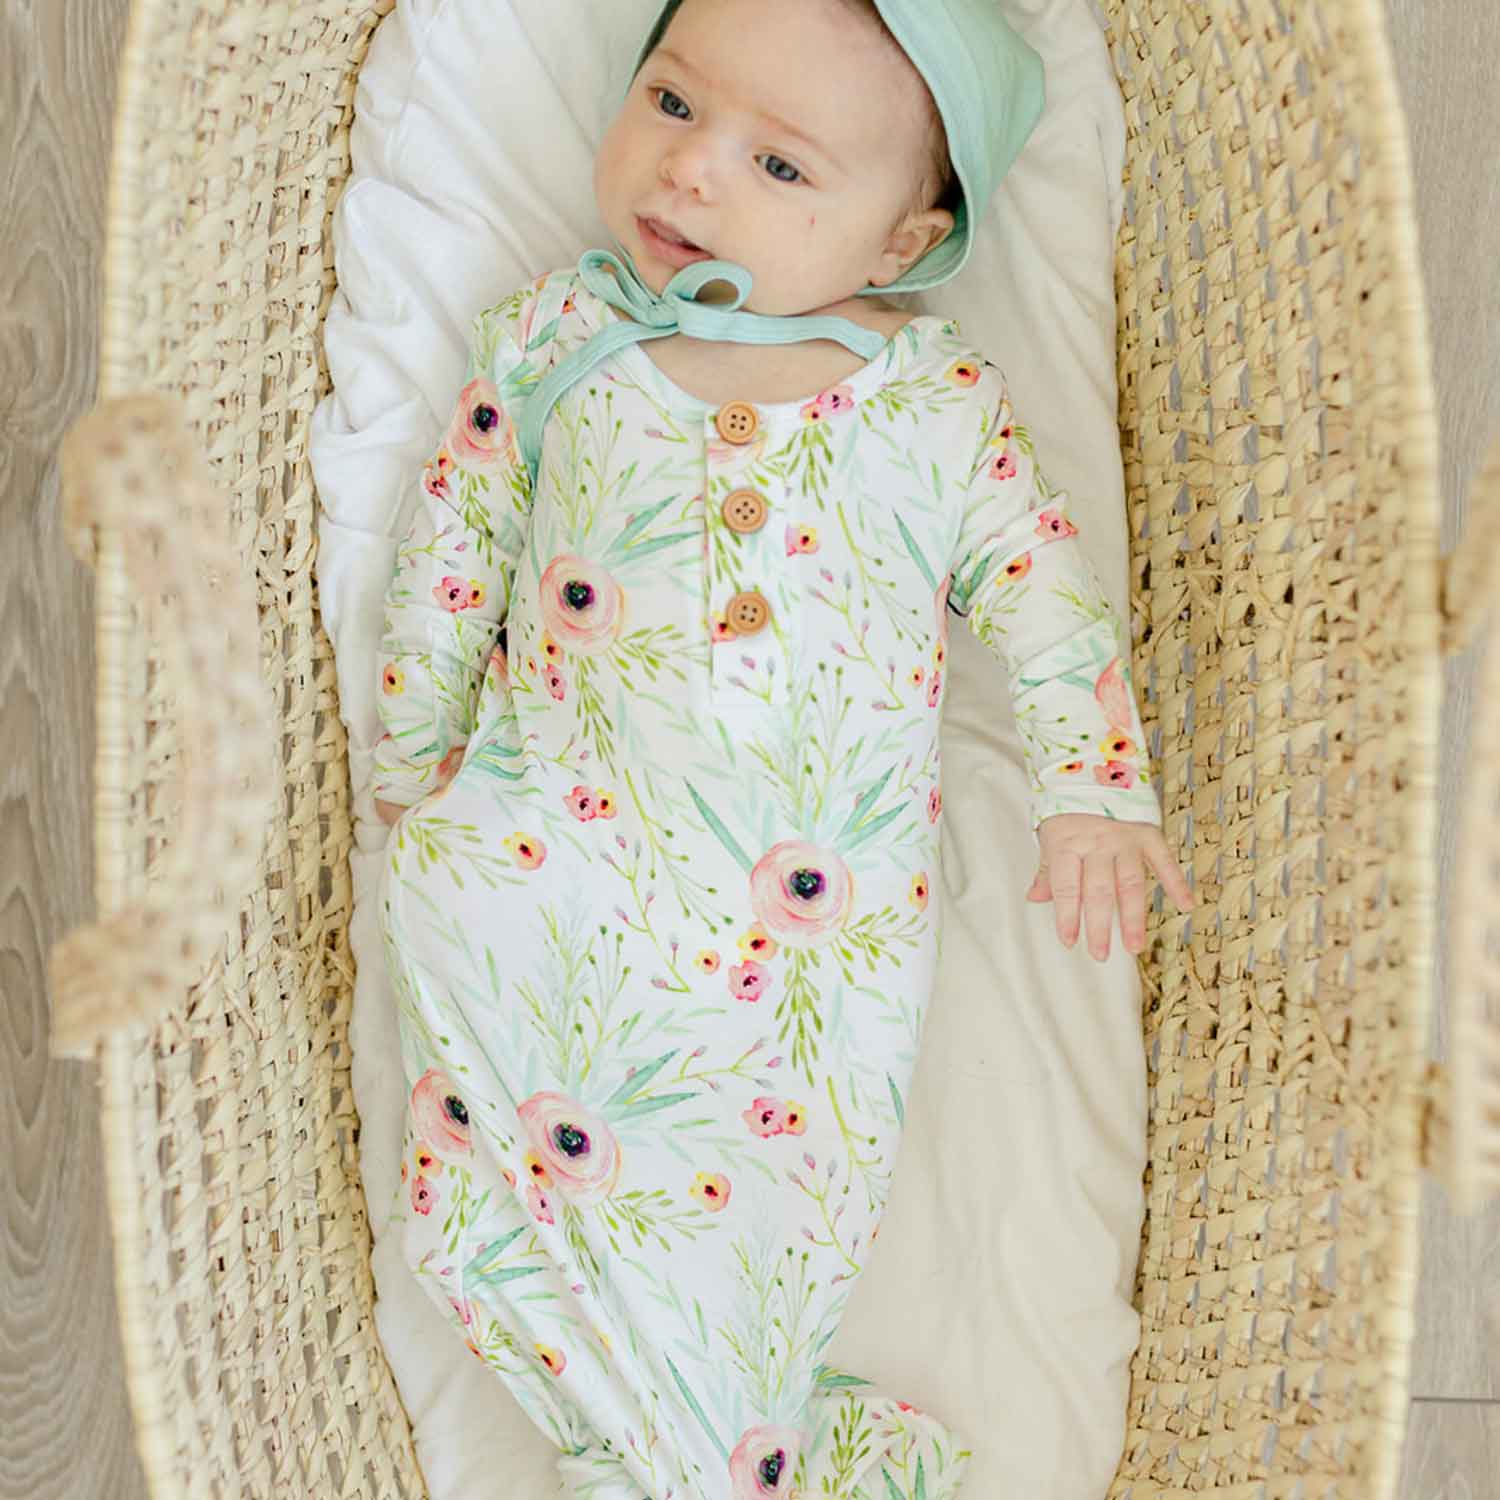 floral baby gown, knotted infant gown, coming home outfit, hospital photo props, baby bonnet mint